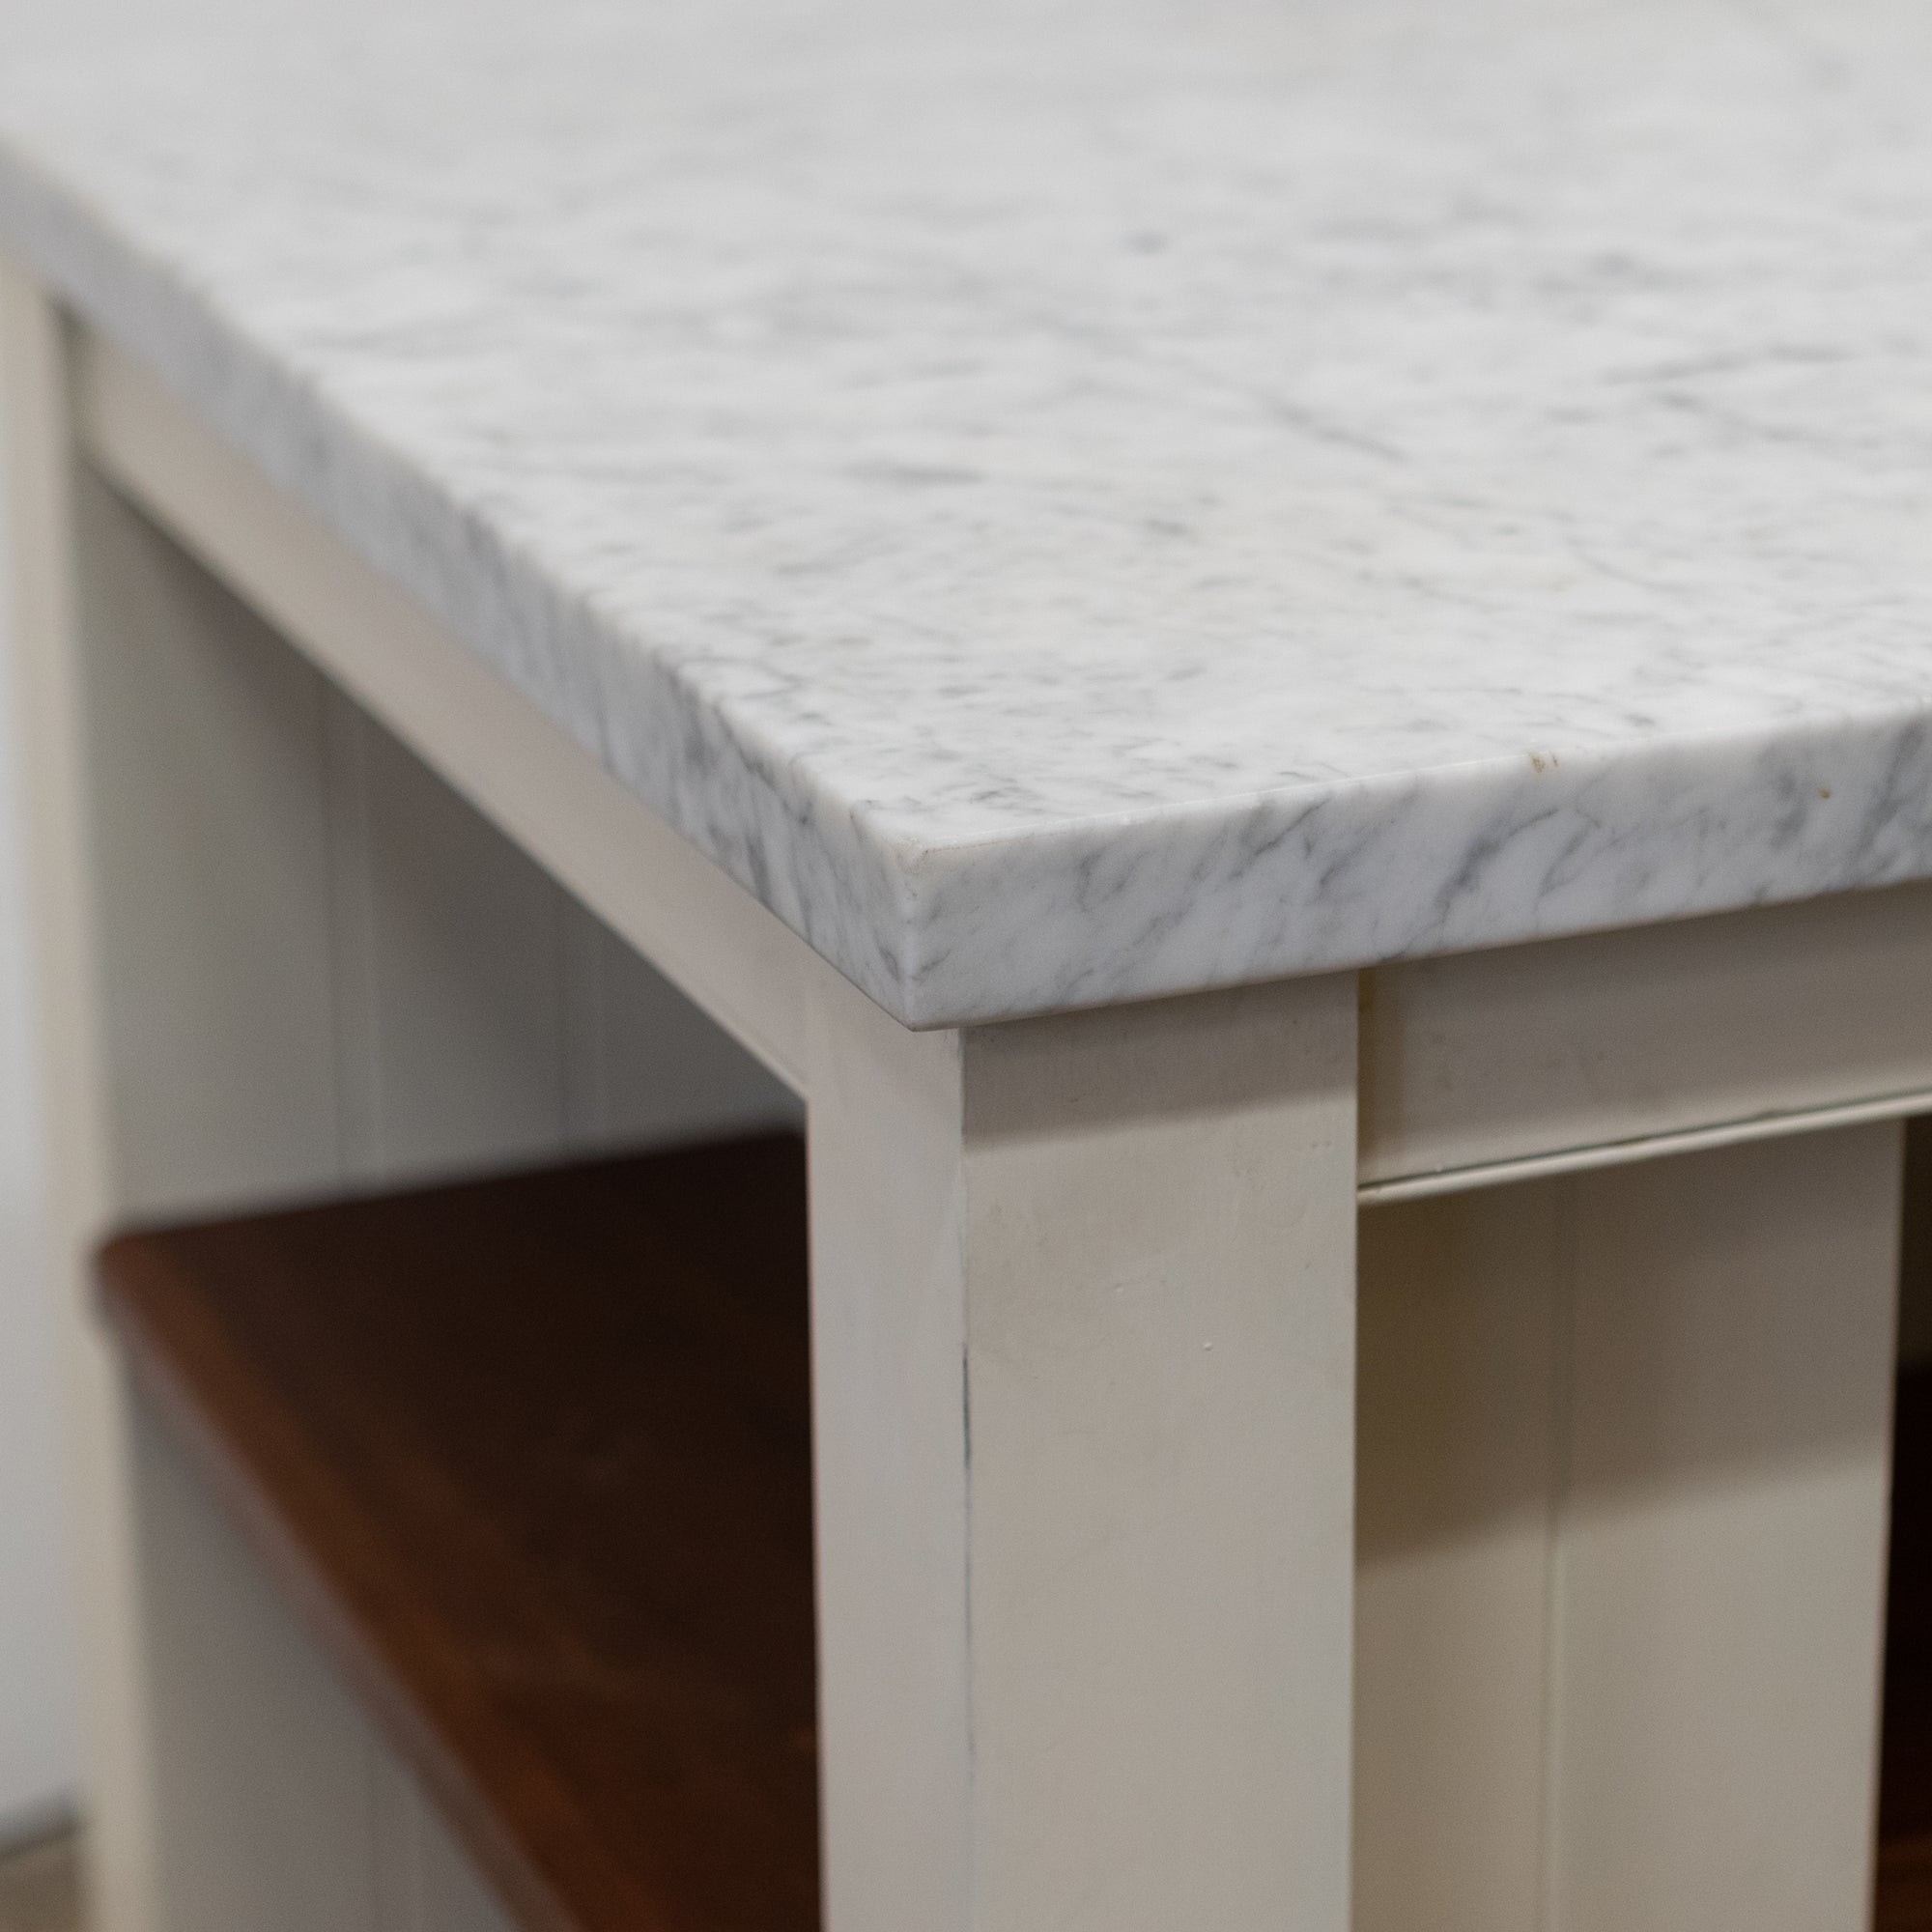 Kitchen Island with Carrara Marble Top | Teak Counter Unit | The Architectural Forum